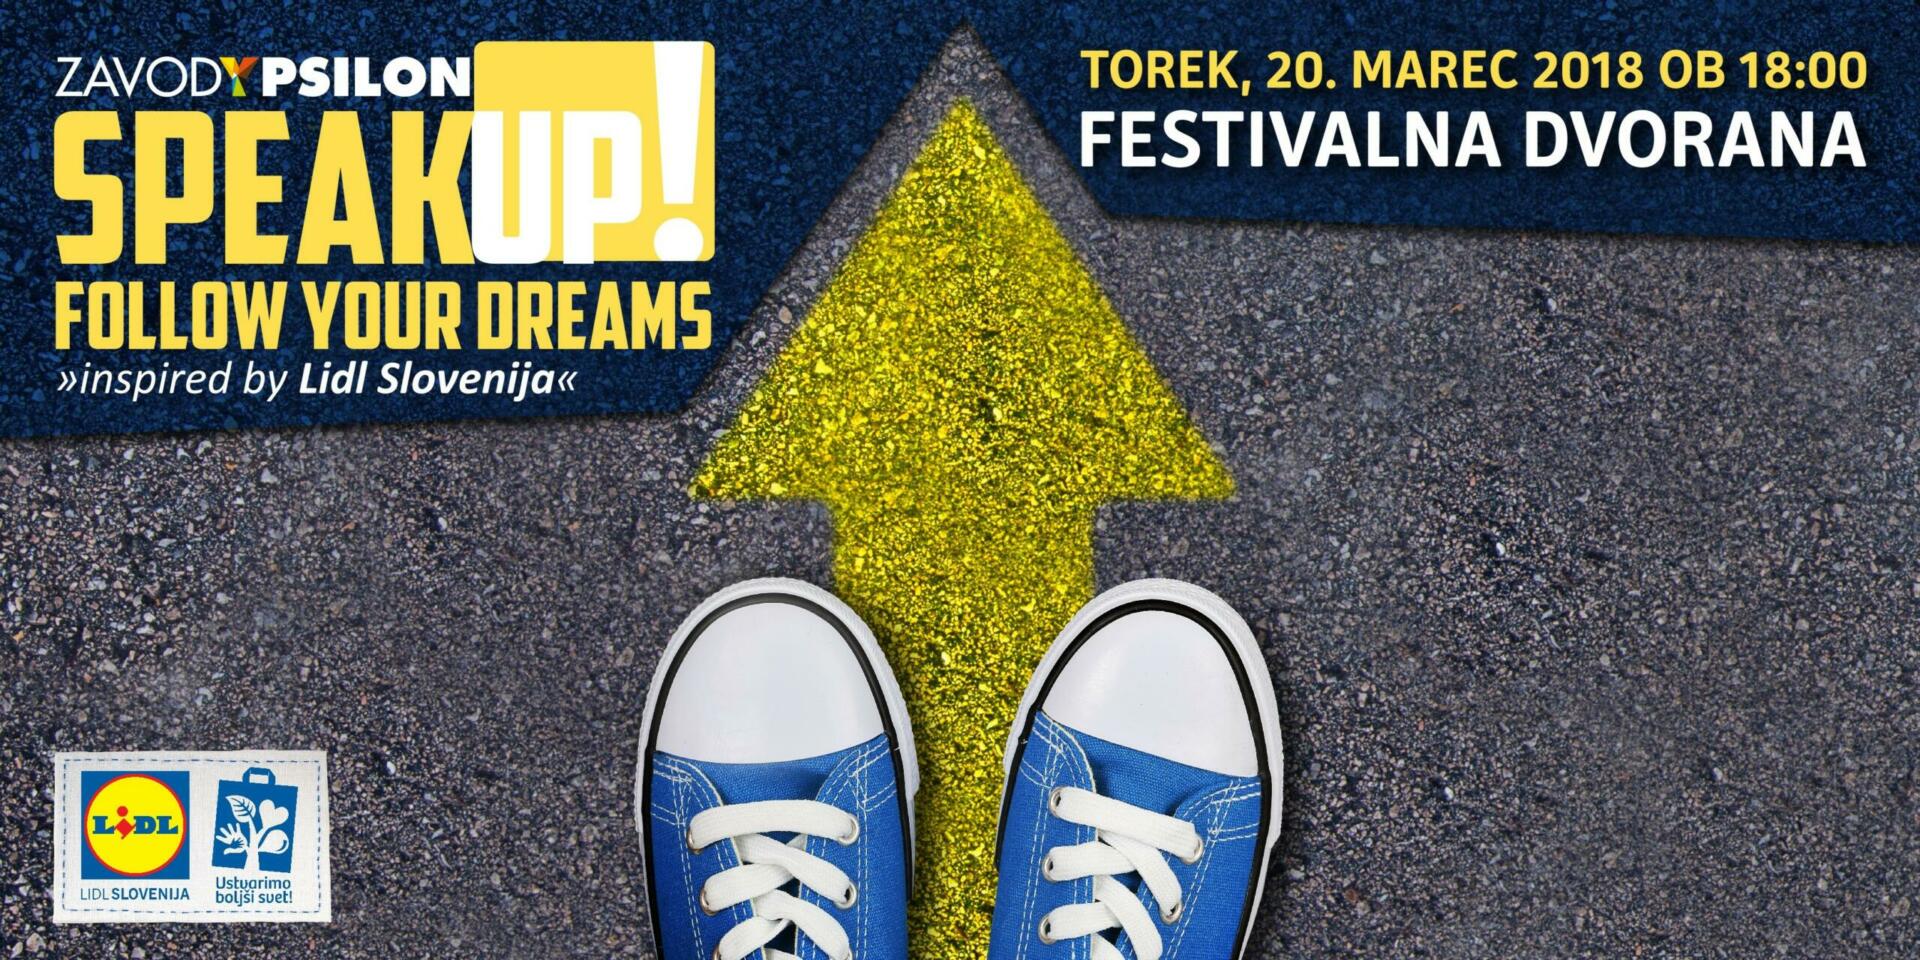 Speak Up! Follow Your Dreams inspired by Lidl Slovenija